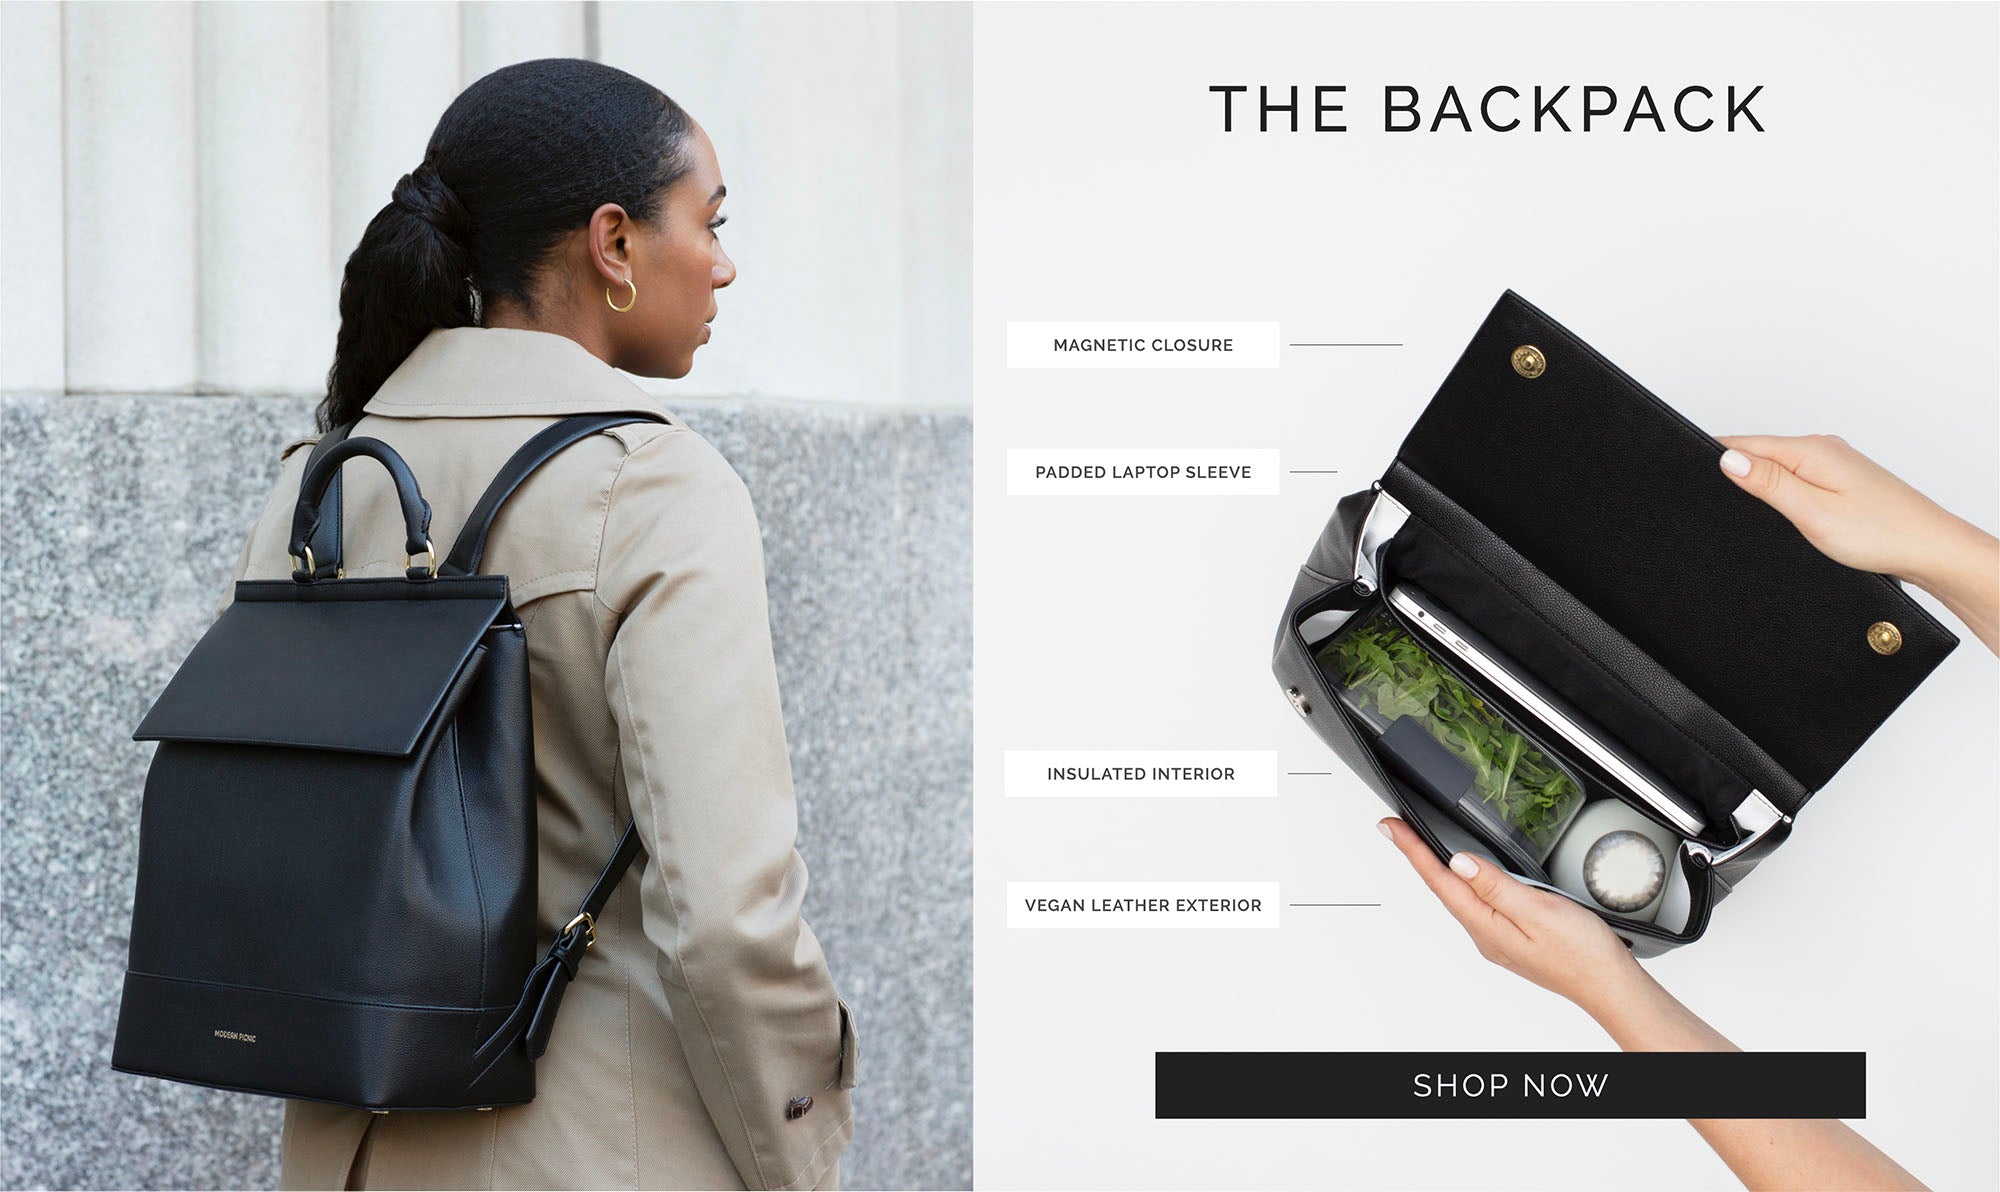 Modern Picnic Backpack for carrying your laptop, lunch + more.